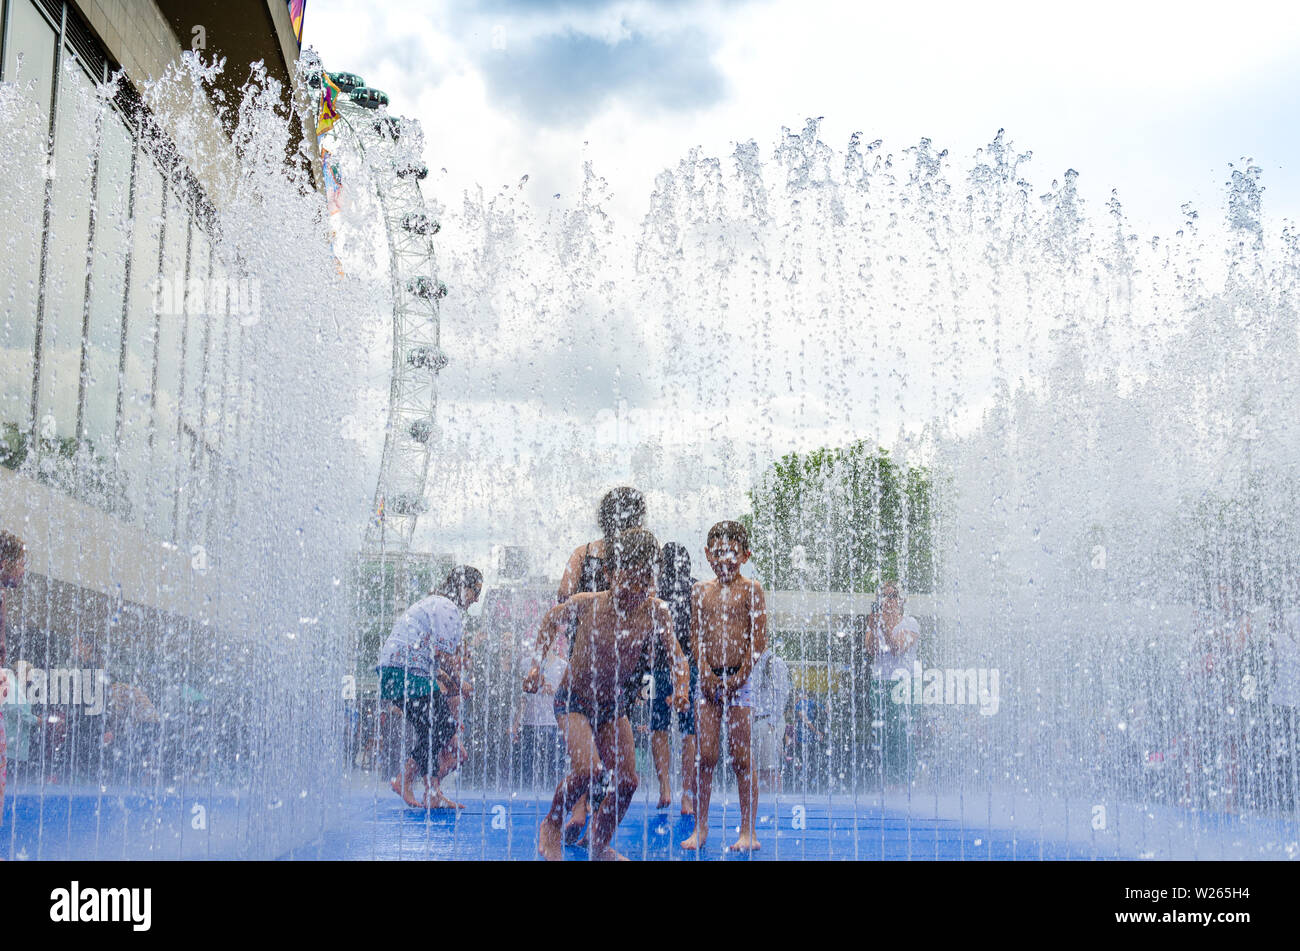 Family fun inside a street fountain during the summer heatwave in London, England Stock Photo